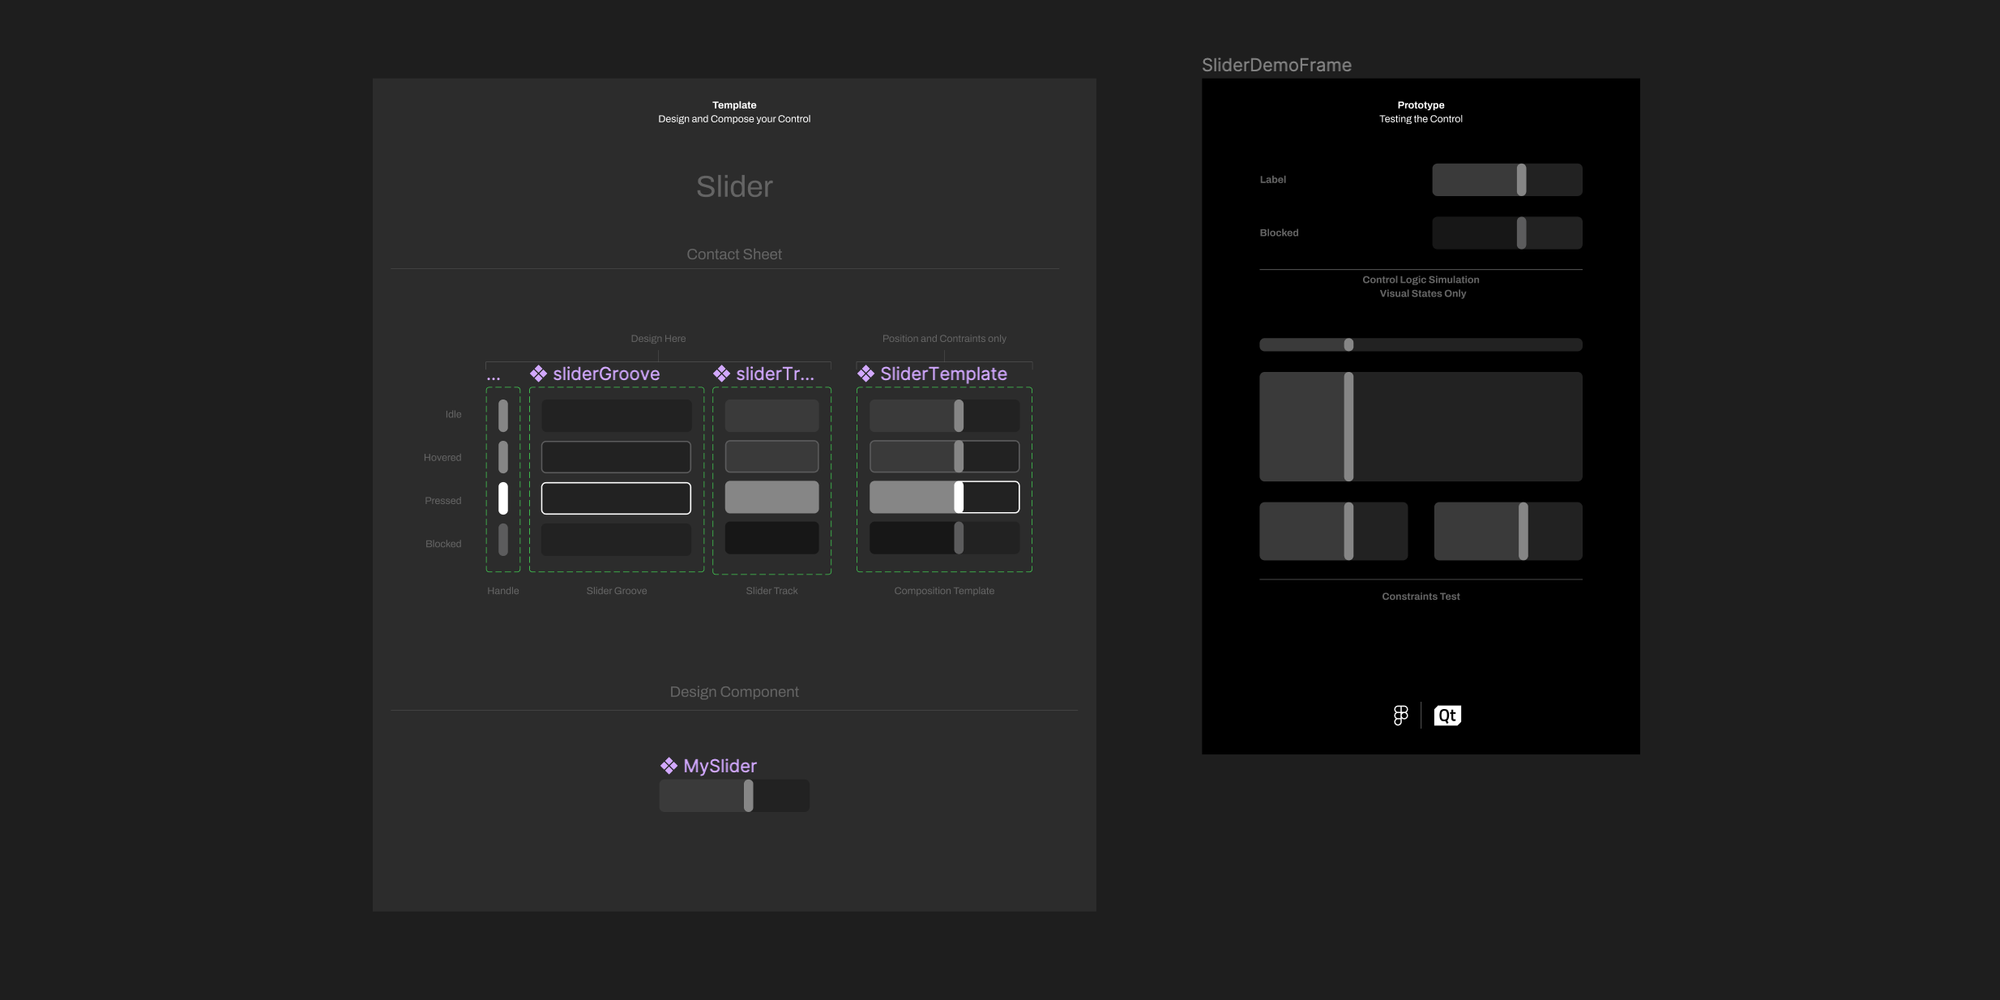 Creating Controls from Figma Design